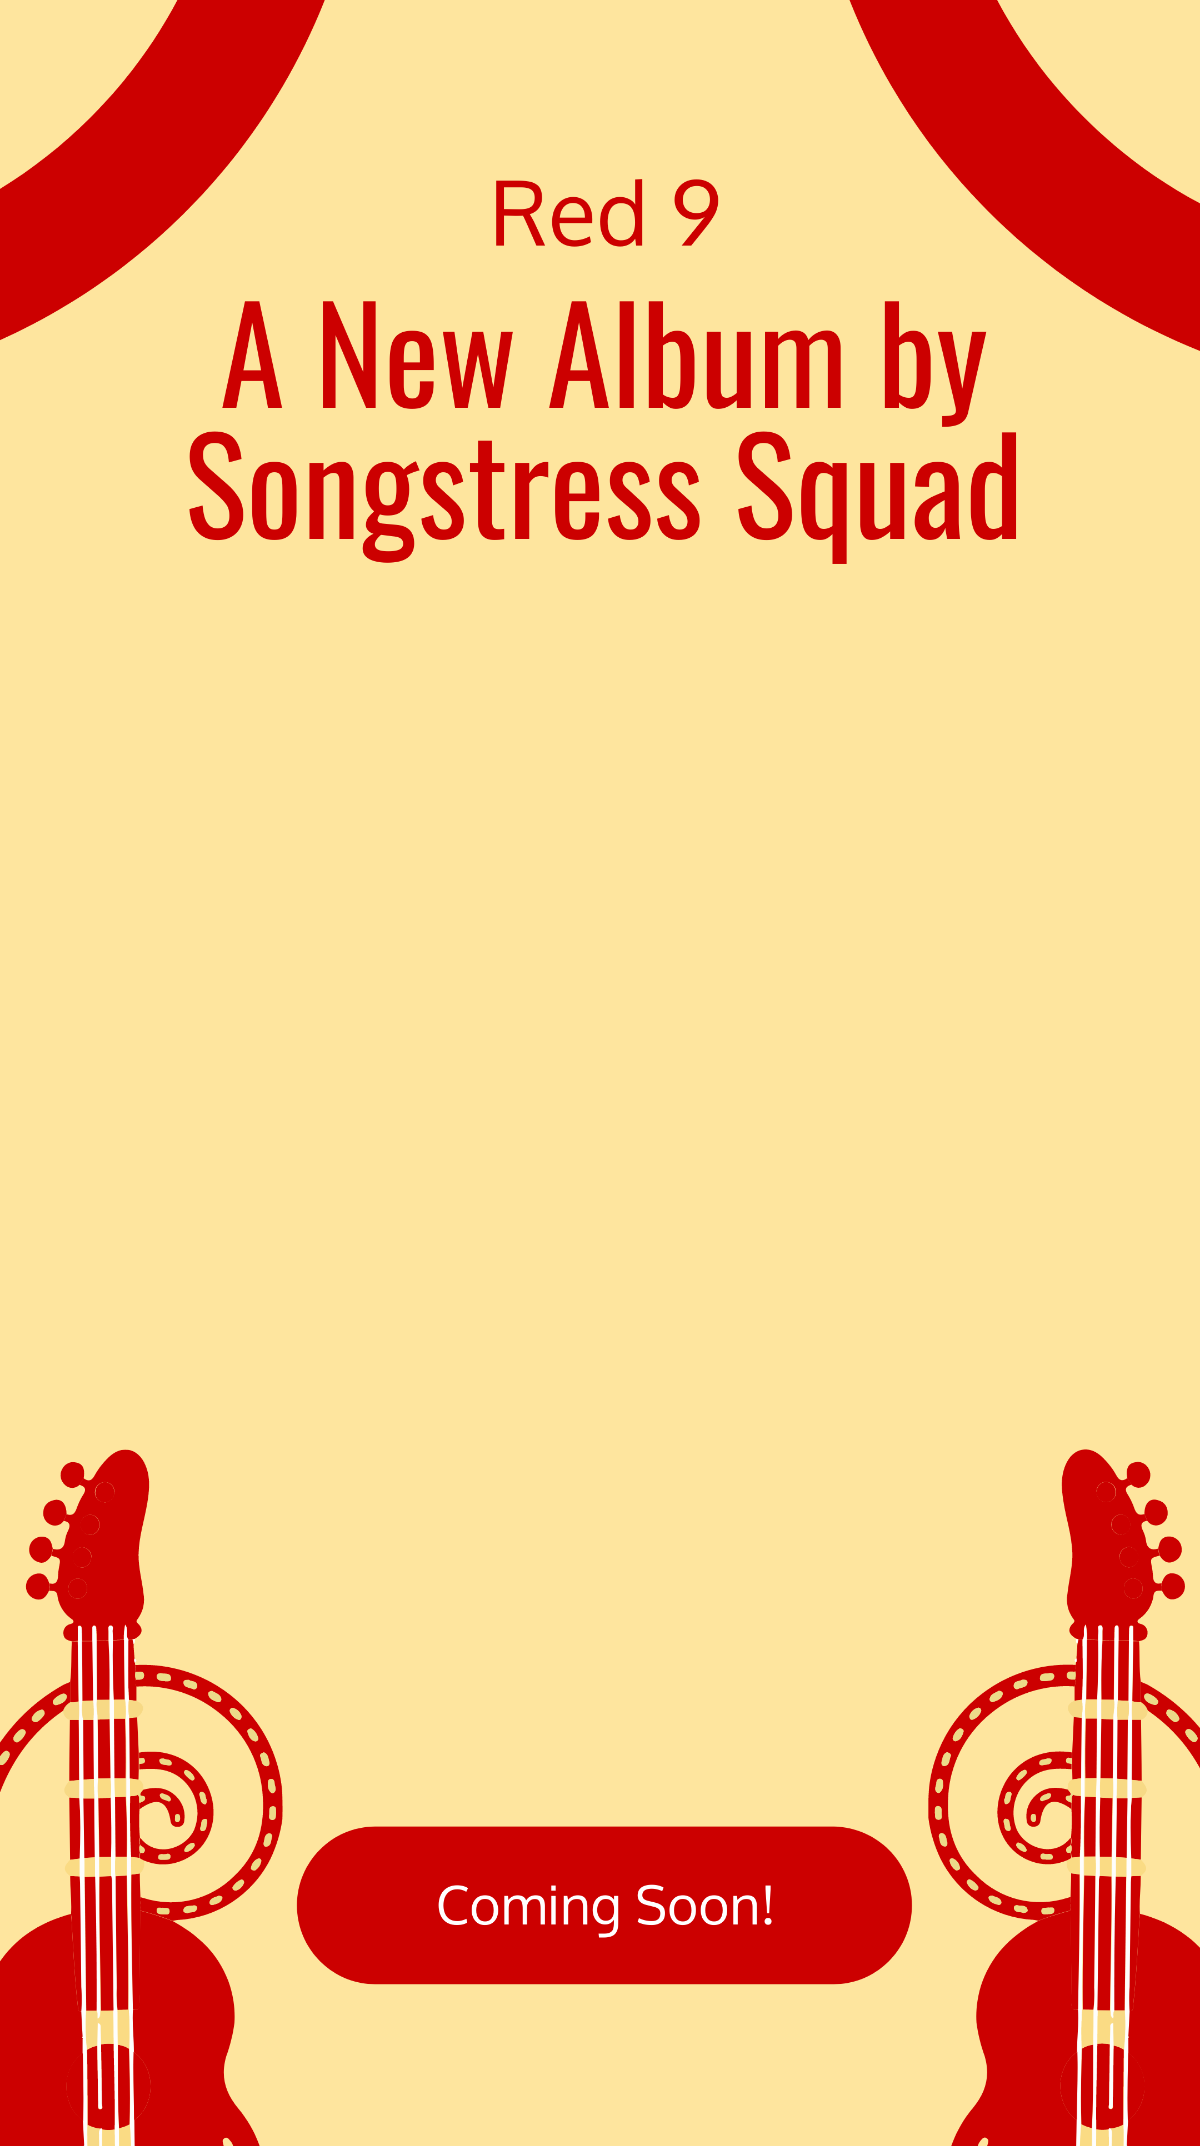 Free New Album Coming Soon Snapchat Geofilter Template